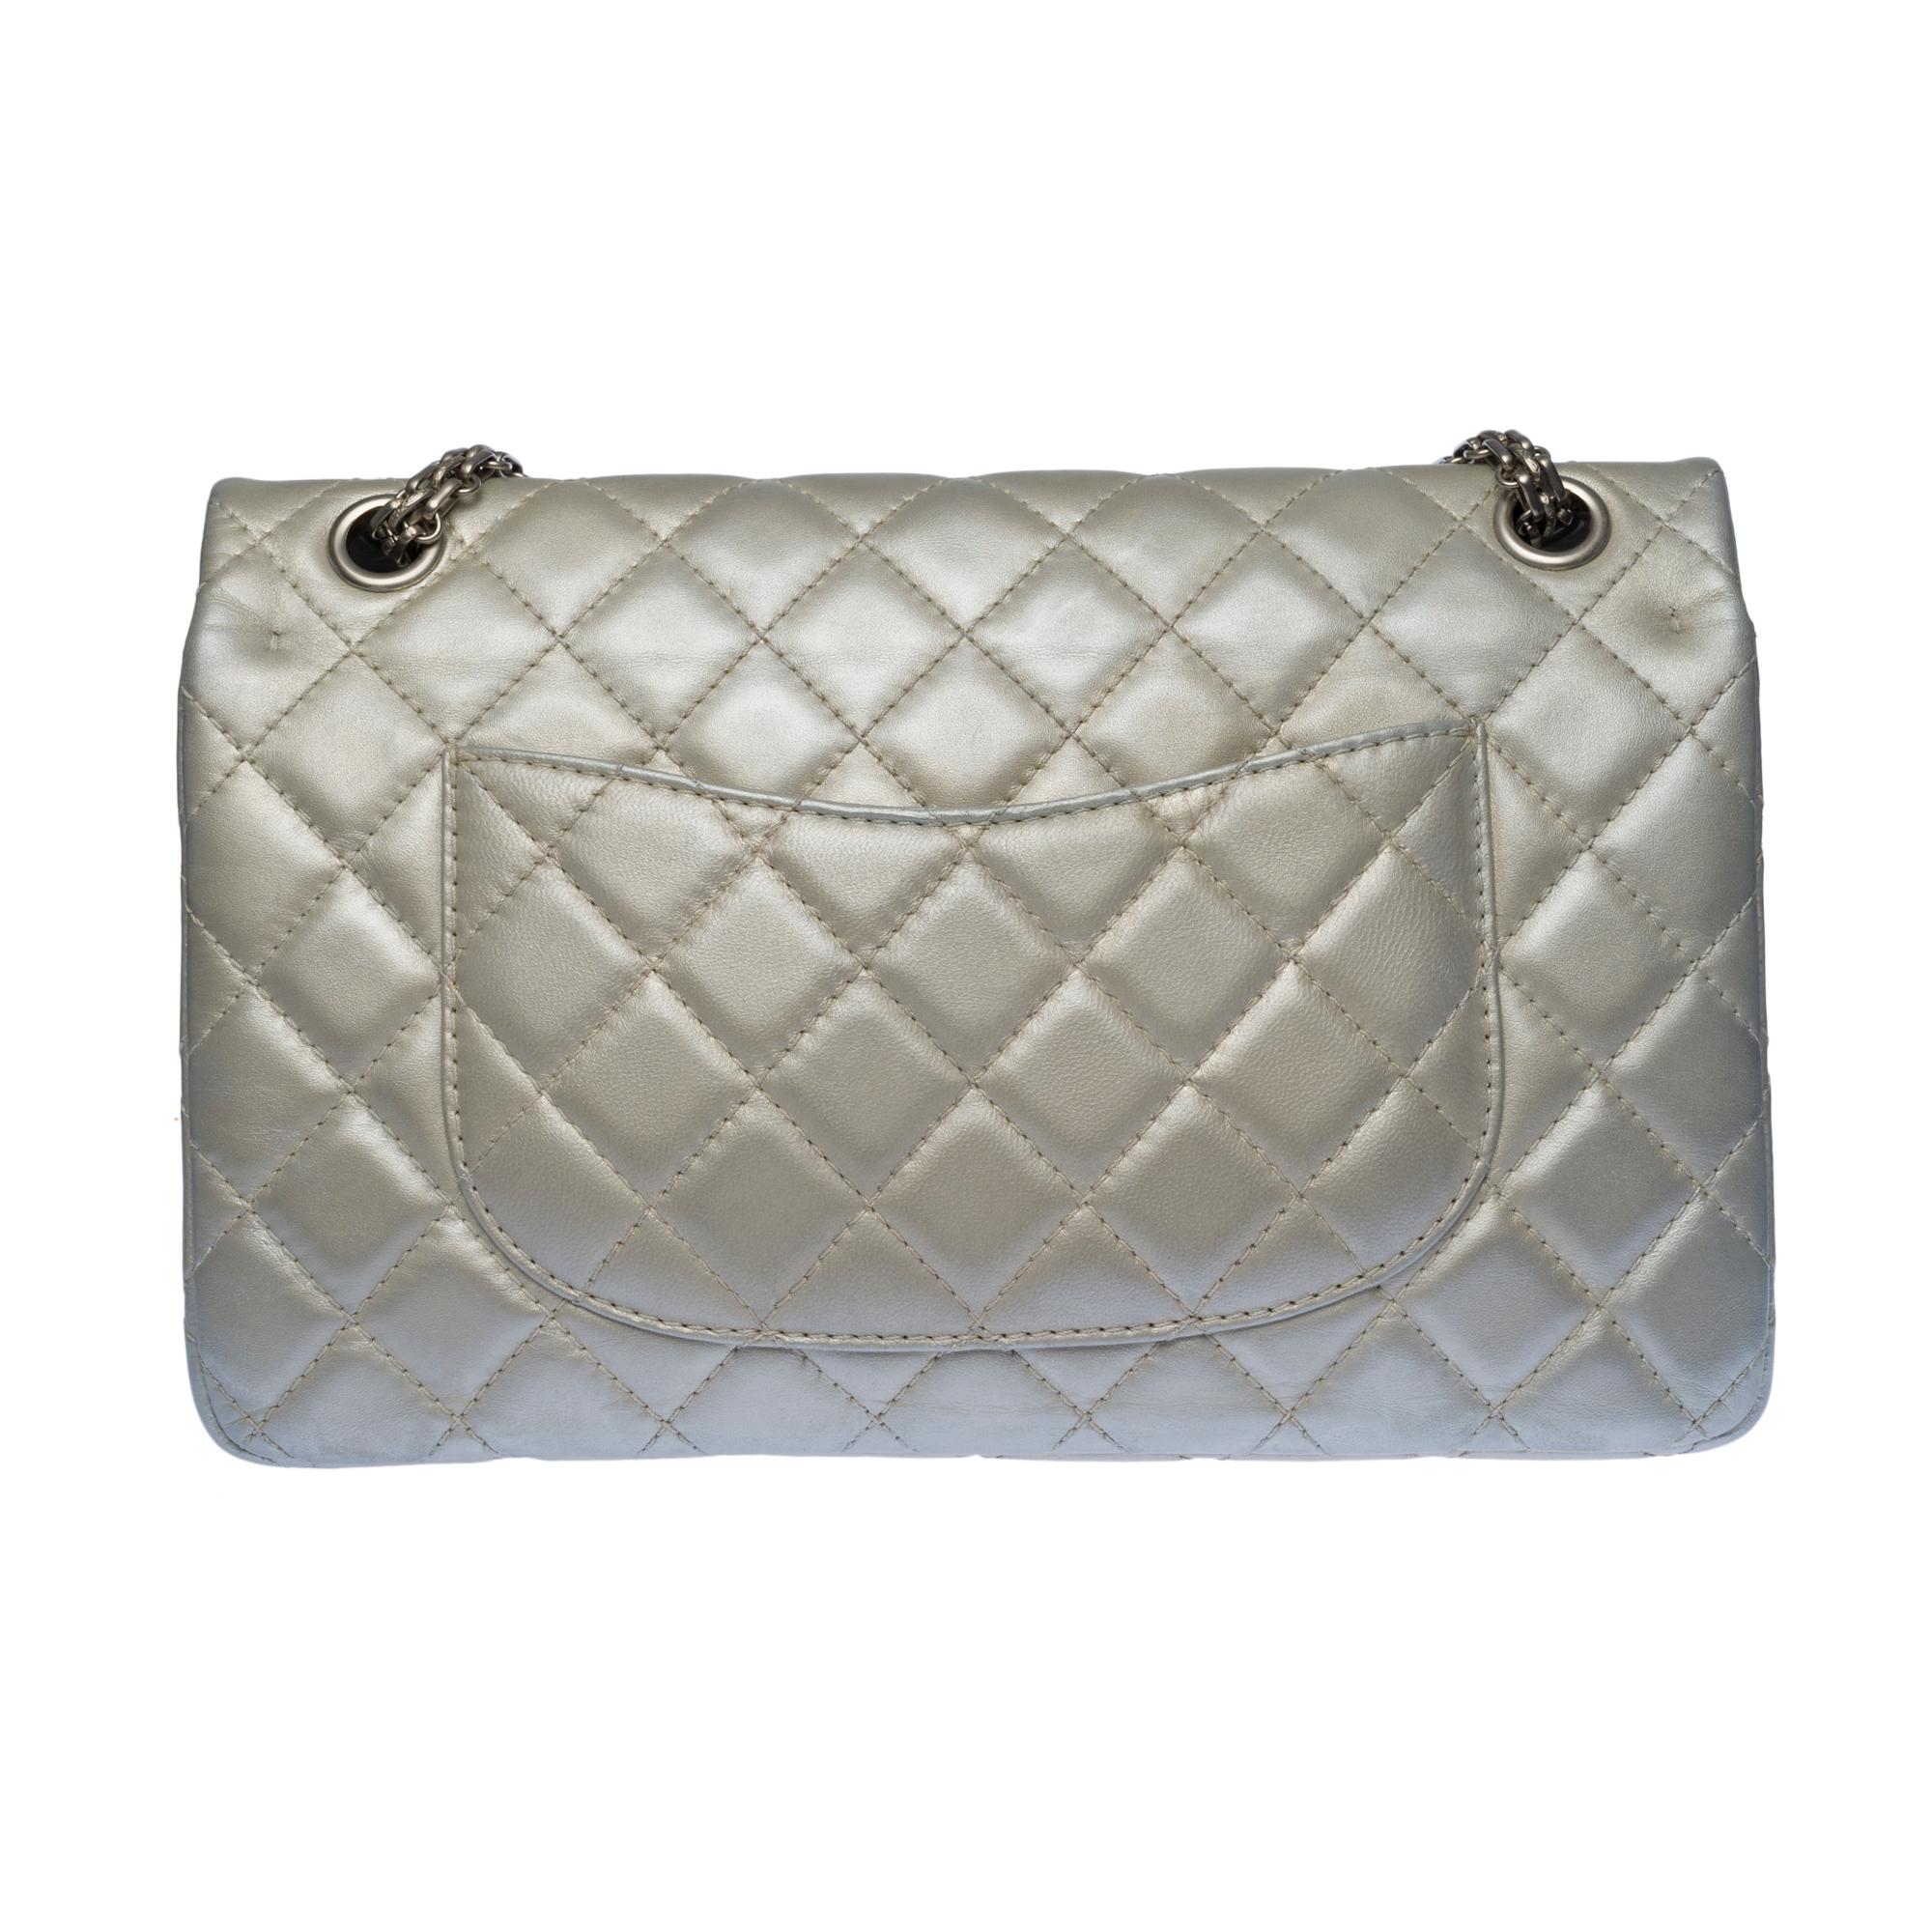 The​ ​Chanel​ ​2.55​ ​in​ ​metallic​ ​silver​ ​quilted​ ​leather,​ ​hardware​ ​in​ ​silver​ ​metal,​ ​one​ ​convertible​ ​chain​ ​strap​ ​in​ ​silver​ ​metal​ ​allowing​ ​the​ ​bag​ ​to​ ​be​ ​worn​ ​in​ ​the​ ​hand​ ​or​ ​on​ ​the​ ​shoulder​ ​or​